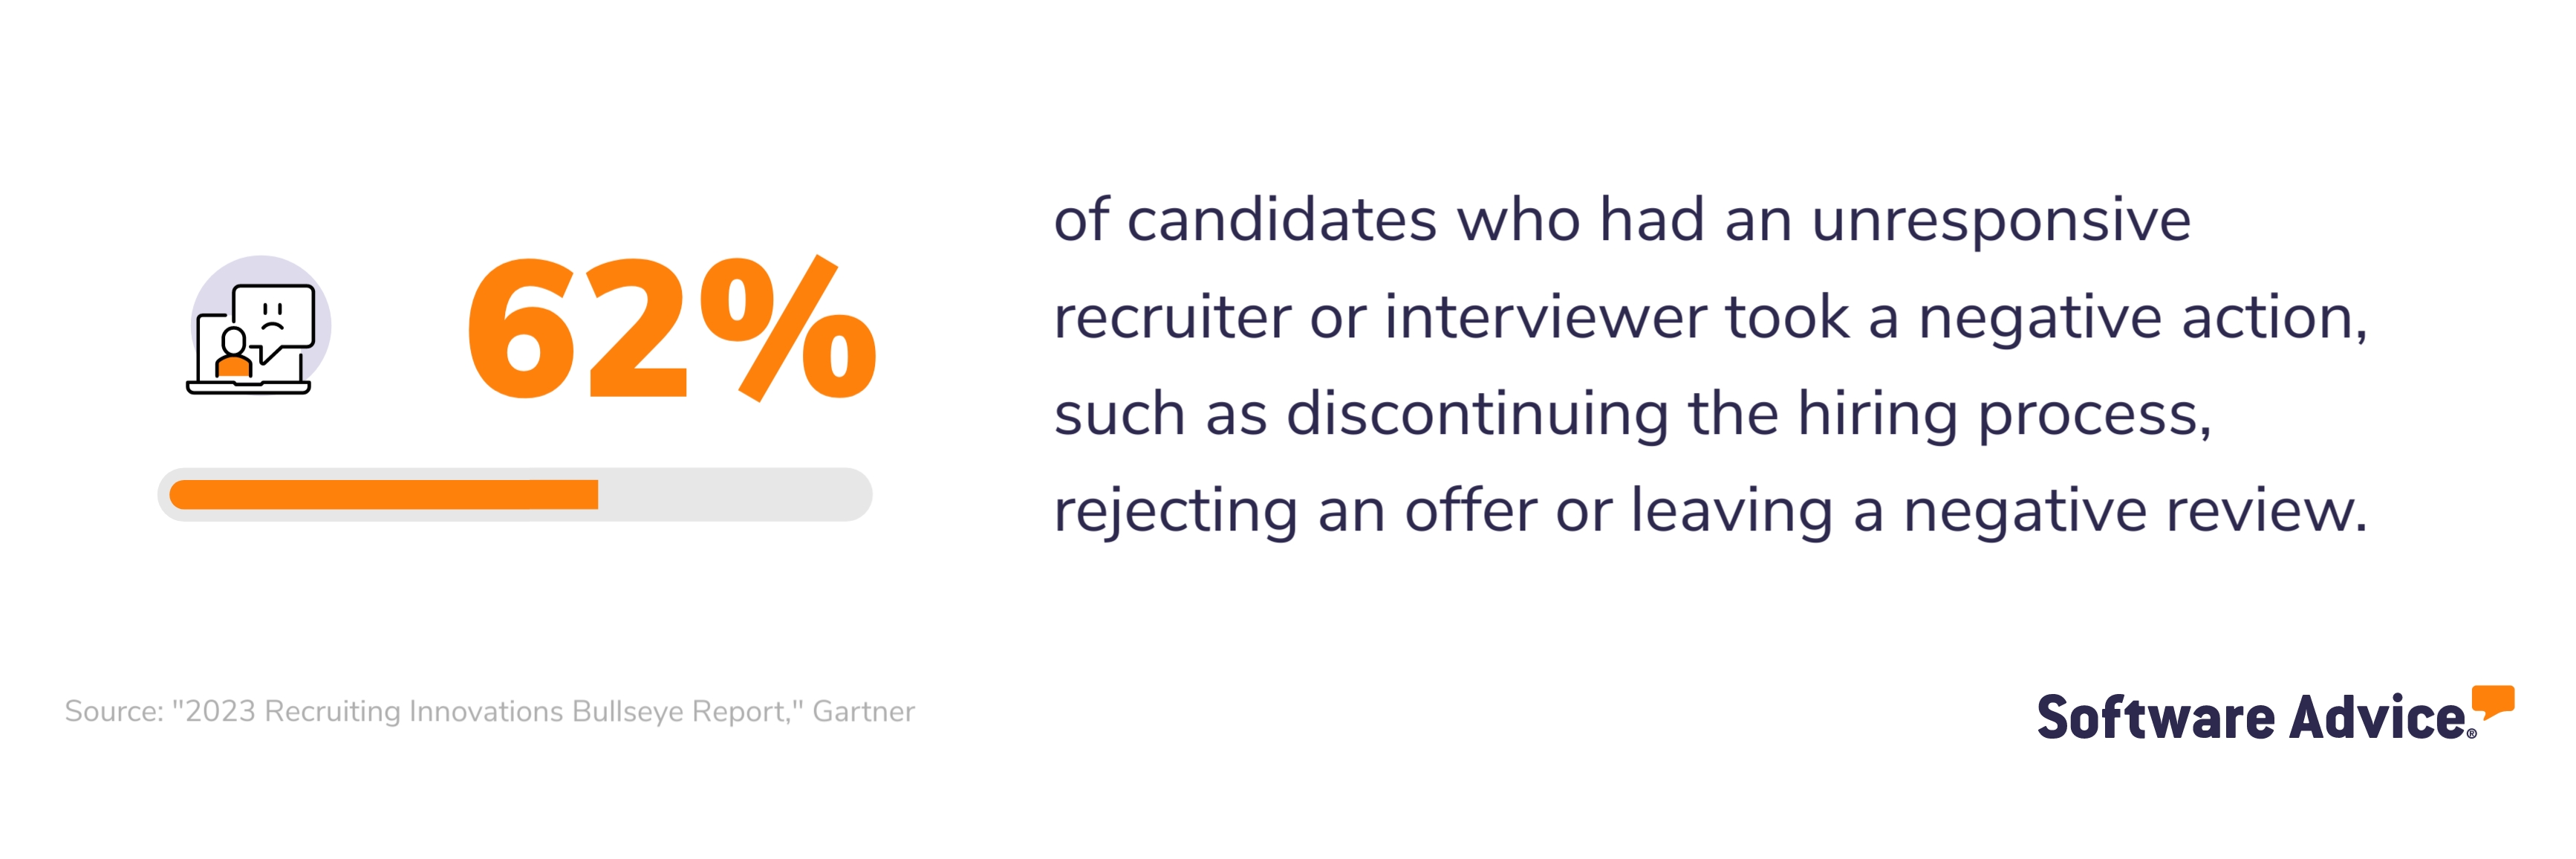 62% of candidates who had an unresponsive recruiter or interviewer took a negative action, such as discounting the hiring process, rejecting an offer or leaving a negative review.